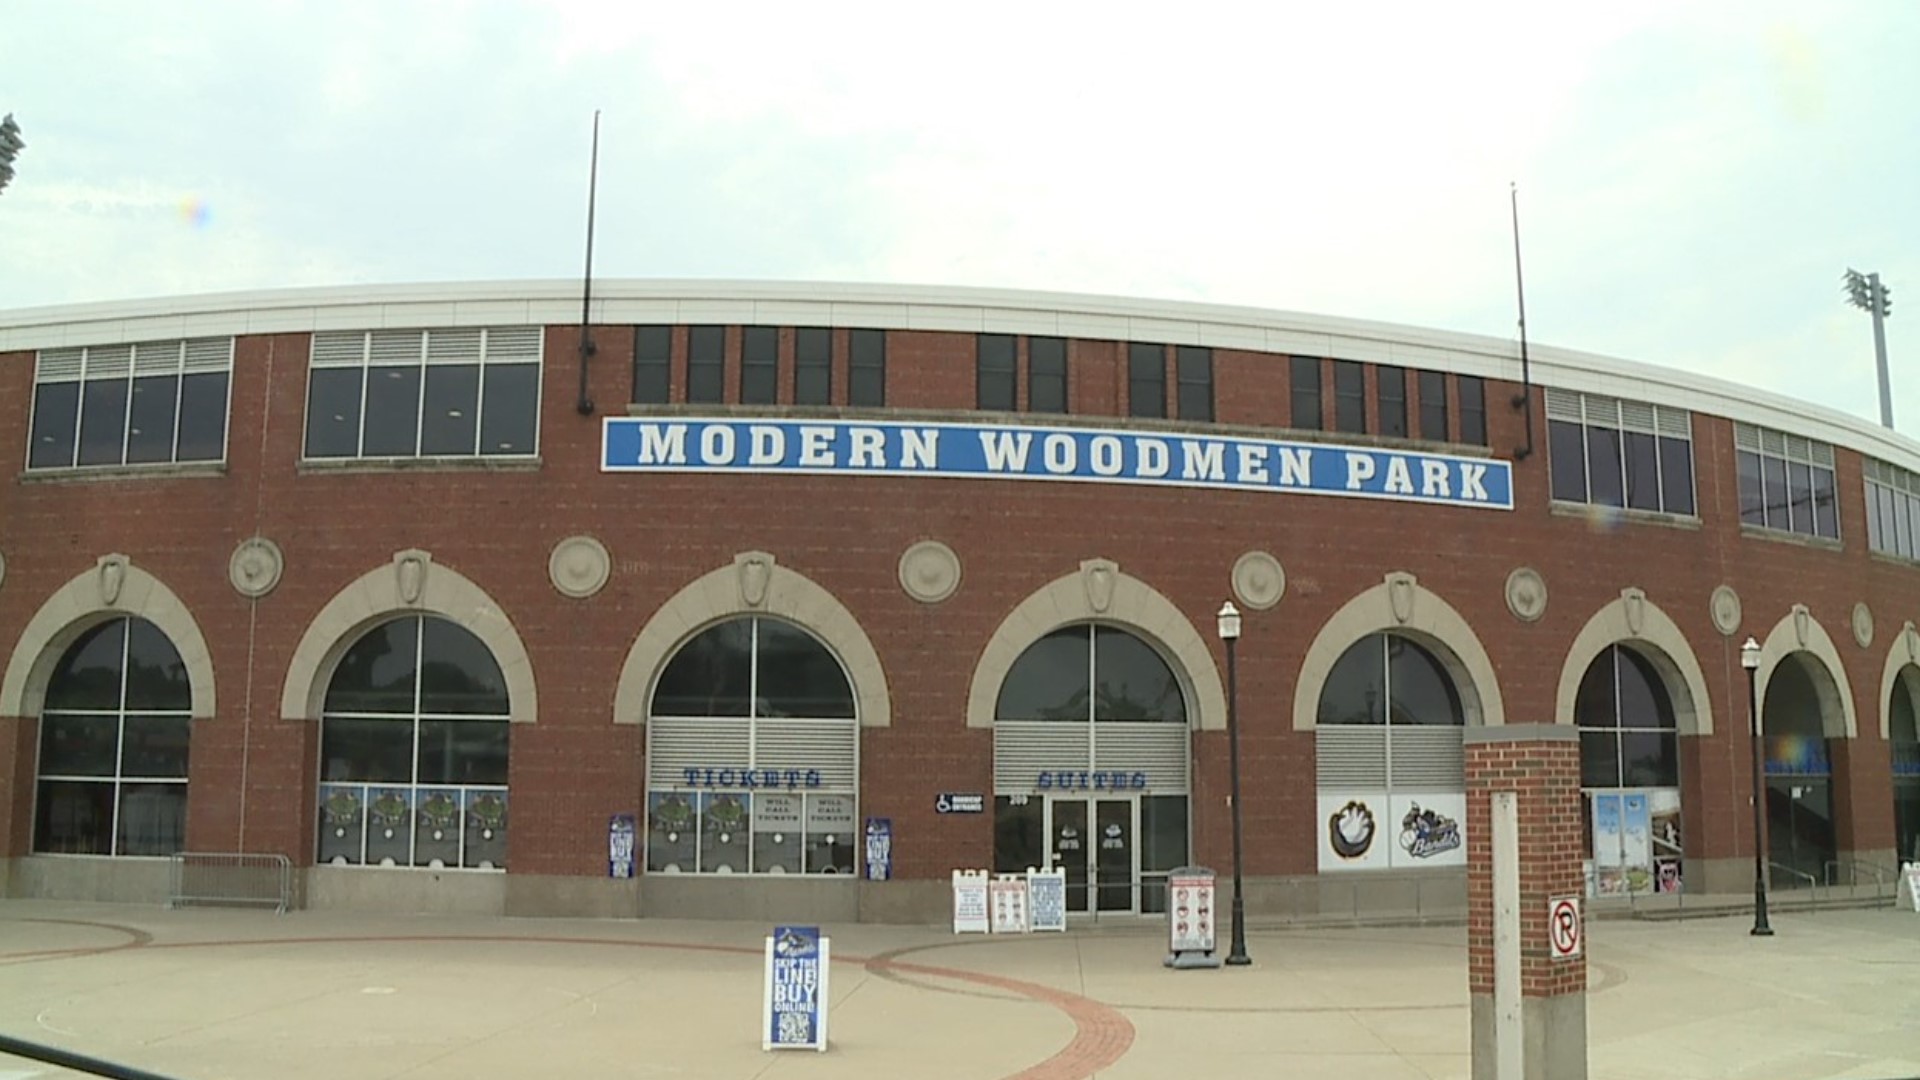 USA Today has named Modern Woodmen Park the No. 1 minor league ballpark in America.